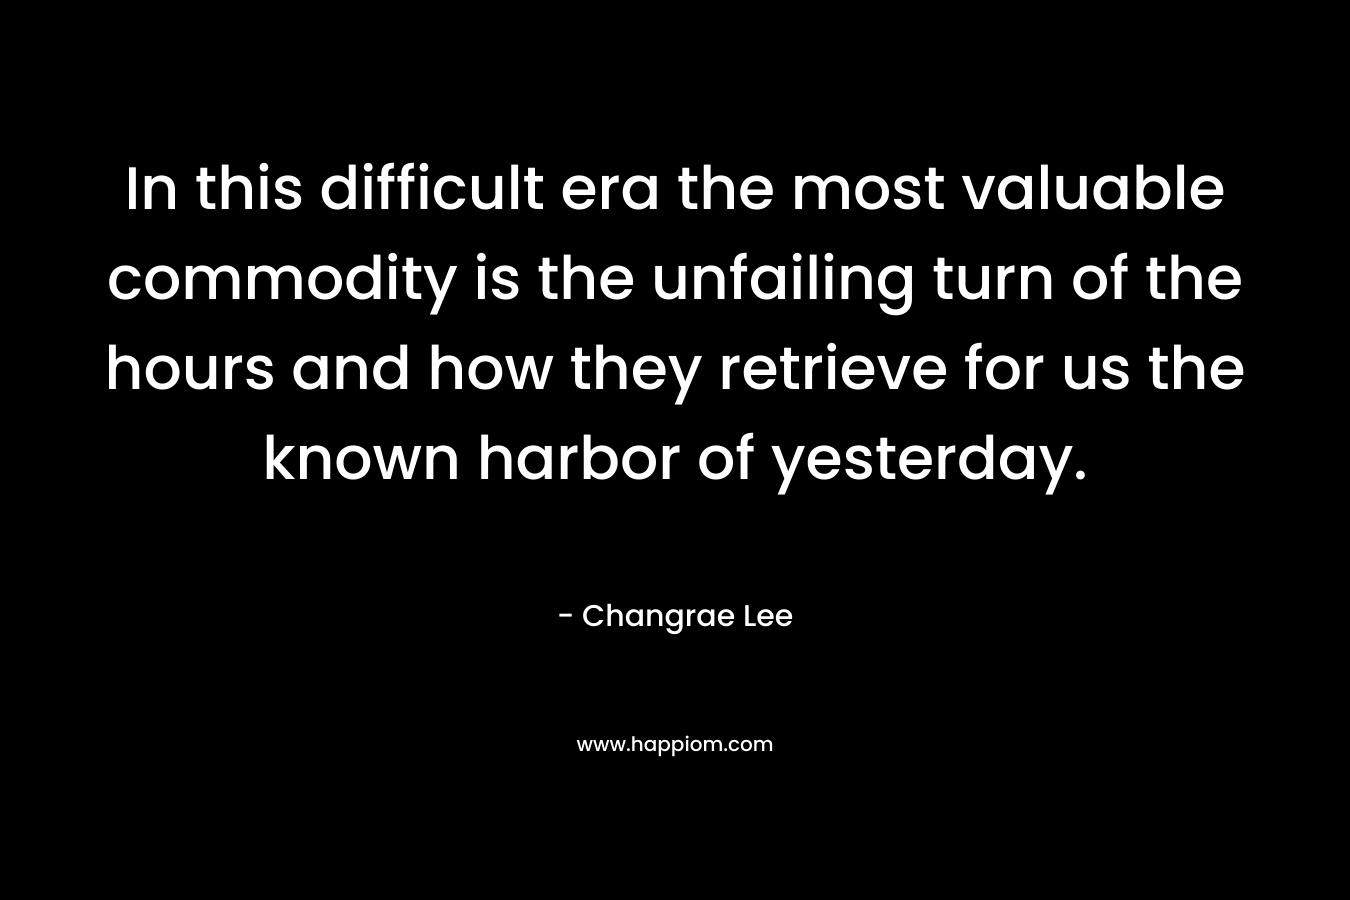 In this difficult era the most valuable commodity is the unfailing turn of the hours and how they retrieve for us the known harbor of yesterday. – Changrae Lee